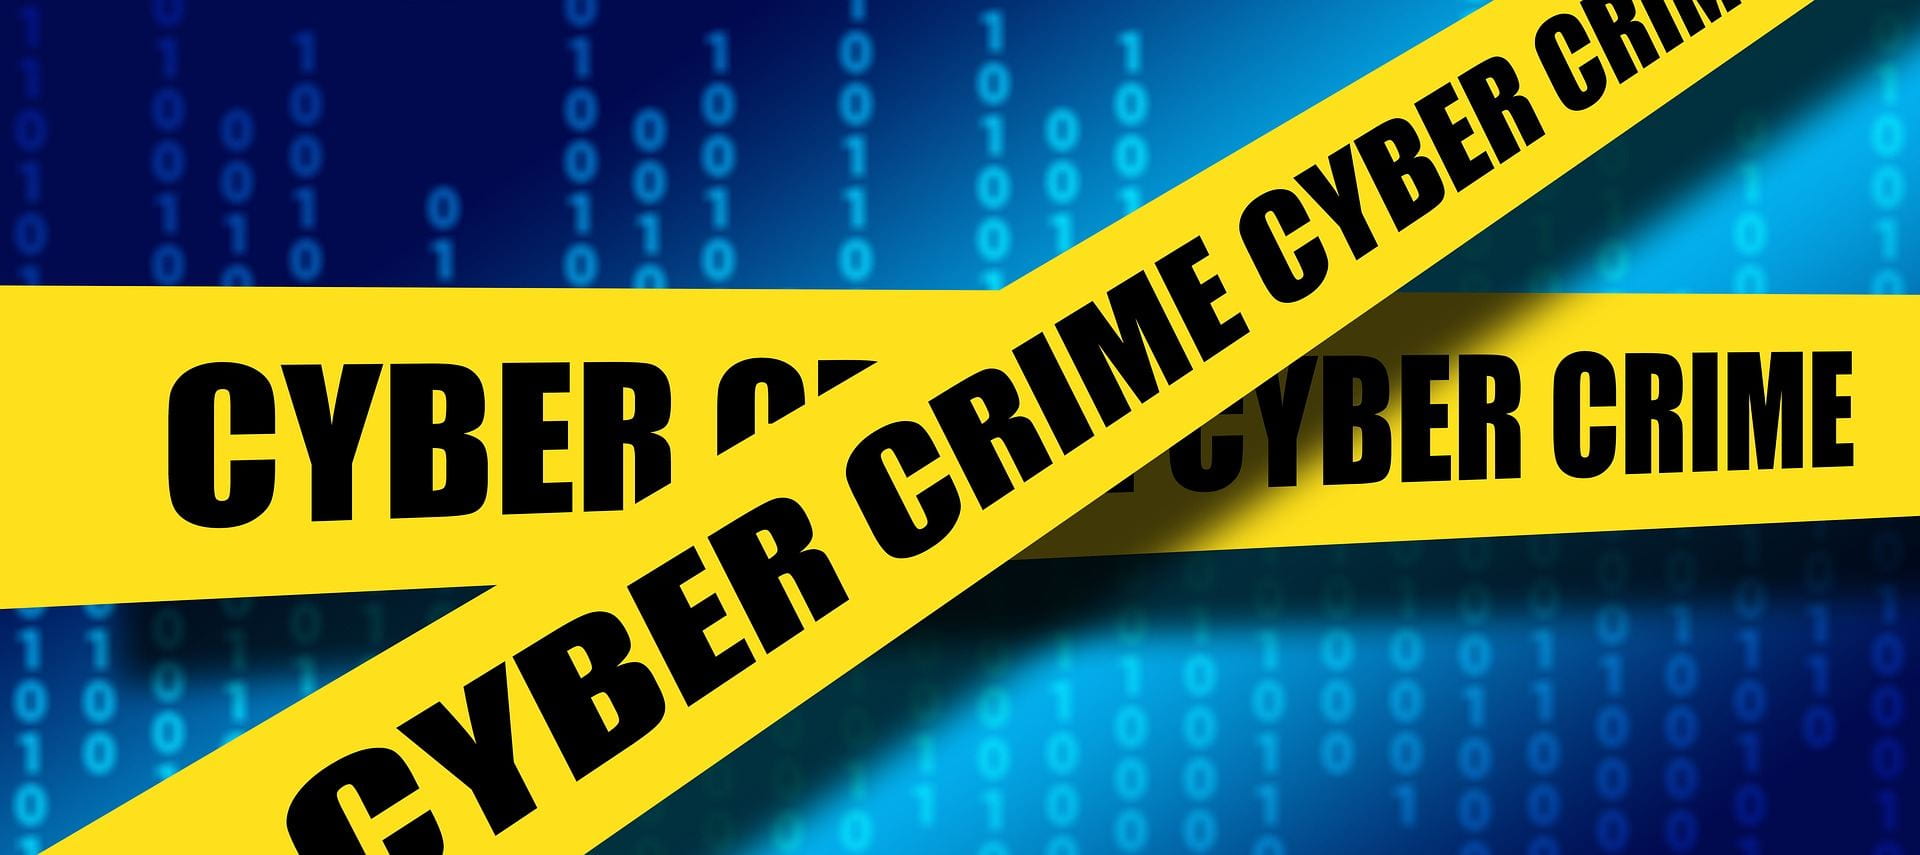 Yellow crime scene tape with "cyber crime" printer on the tape.